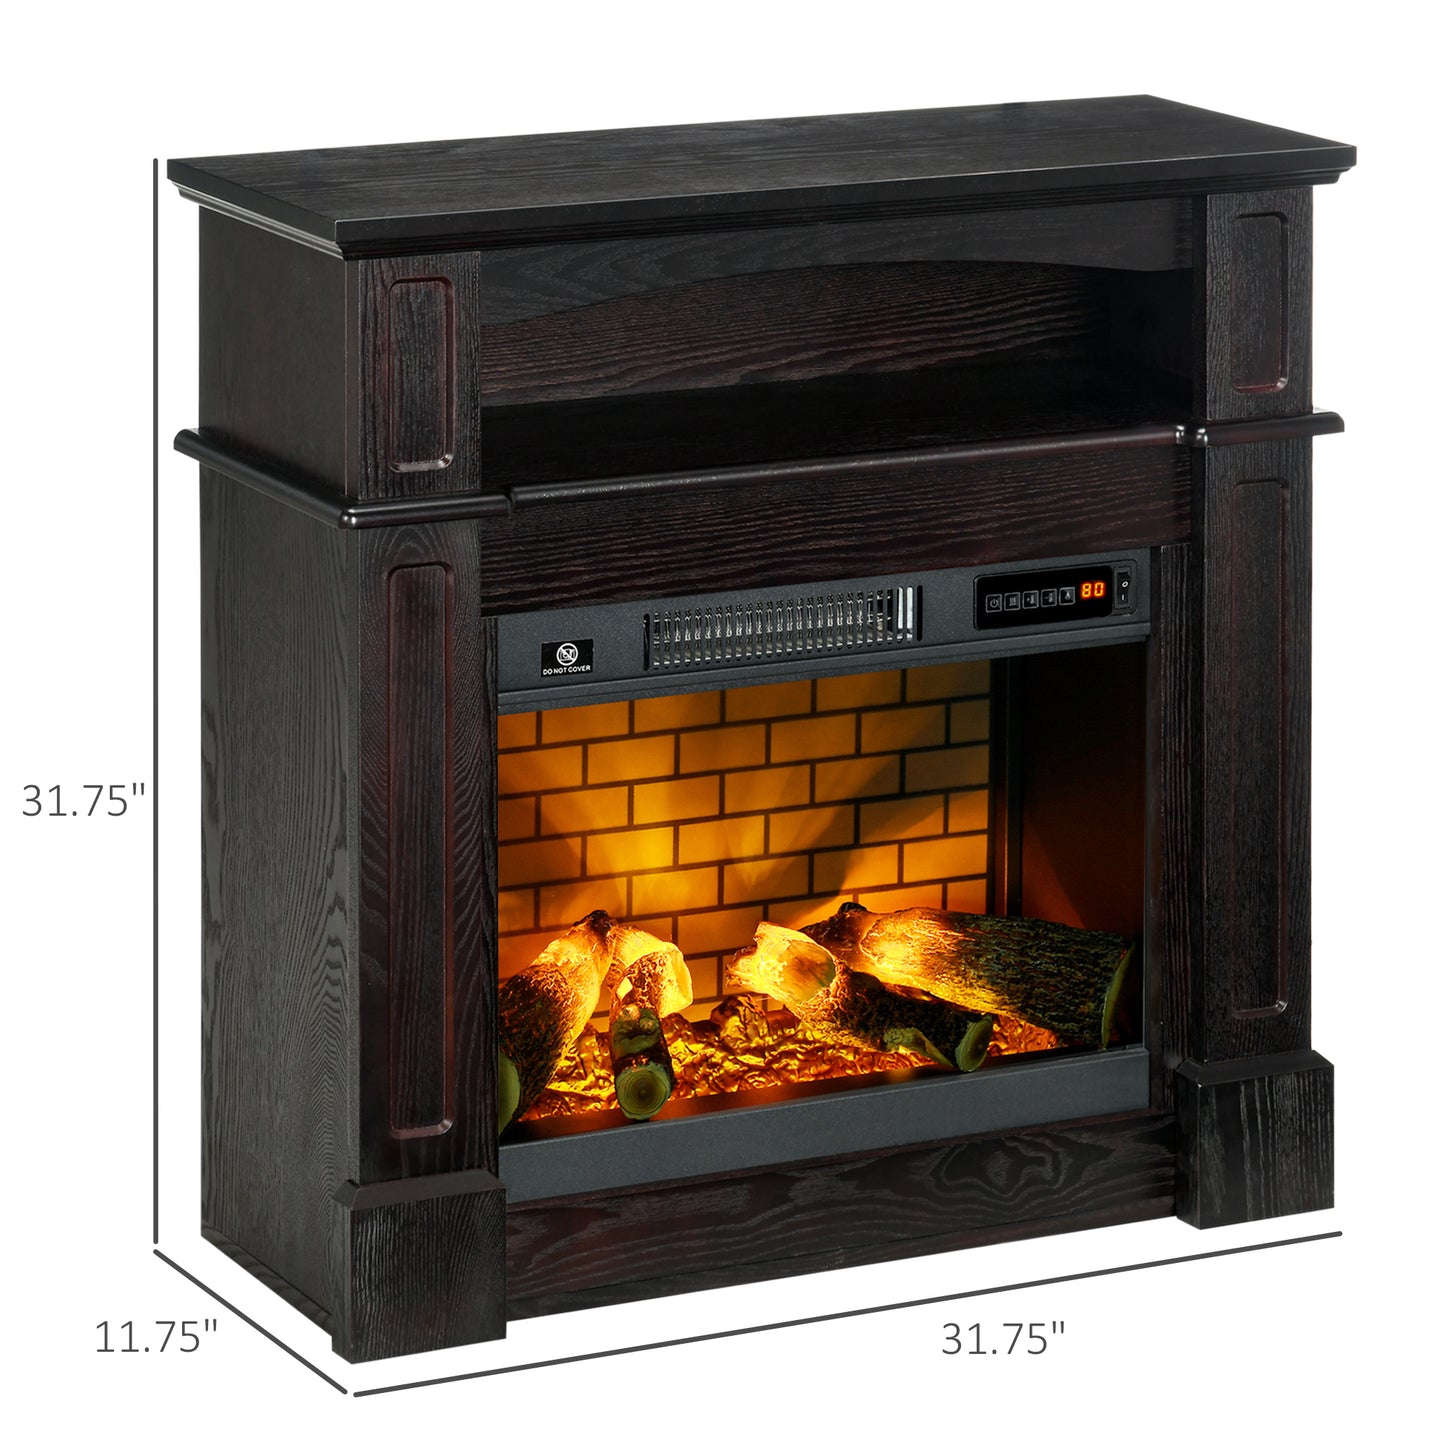 32 Electric Fireplace with Mantel and Shelf, Freestanding Heater with LED Log Flame and Remote Control, 700W/1400W, Brown